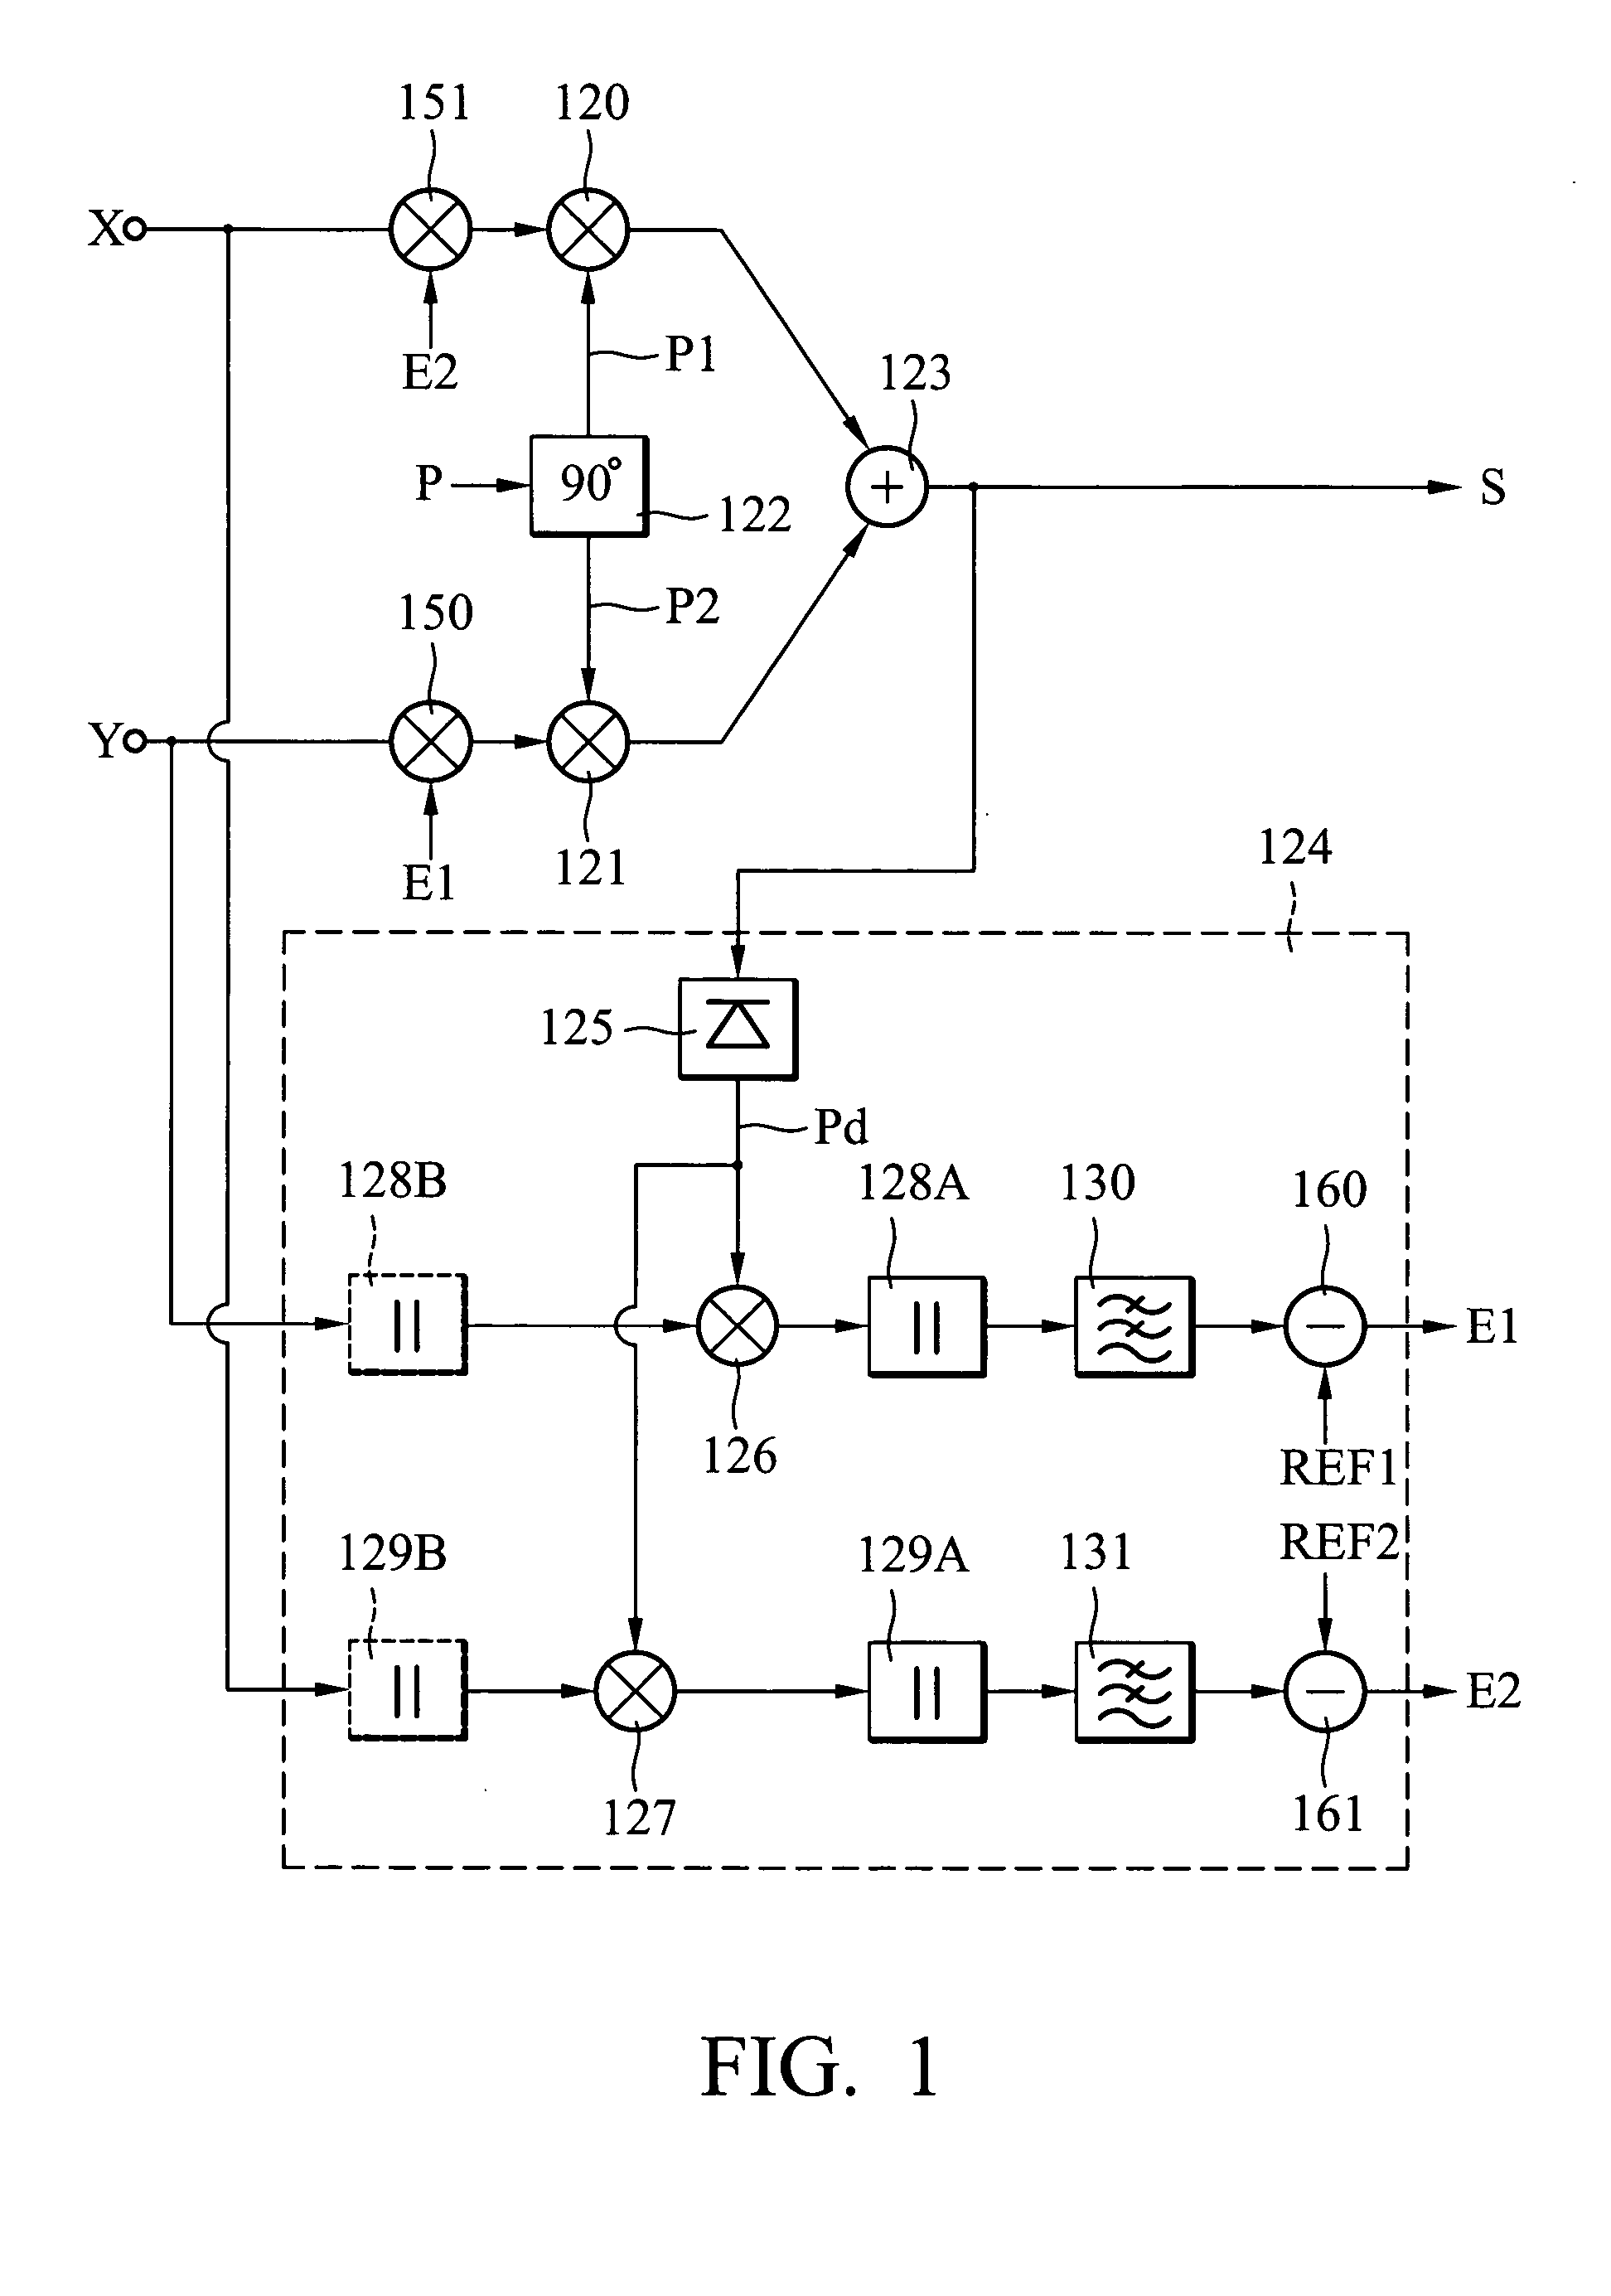 Method and apparatus for I/Q imbalance calibration of a transmitter system